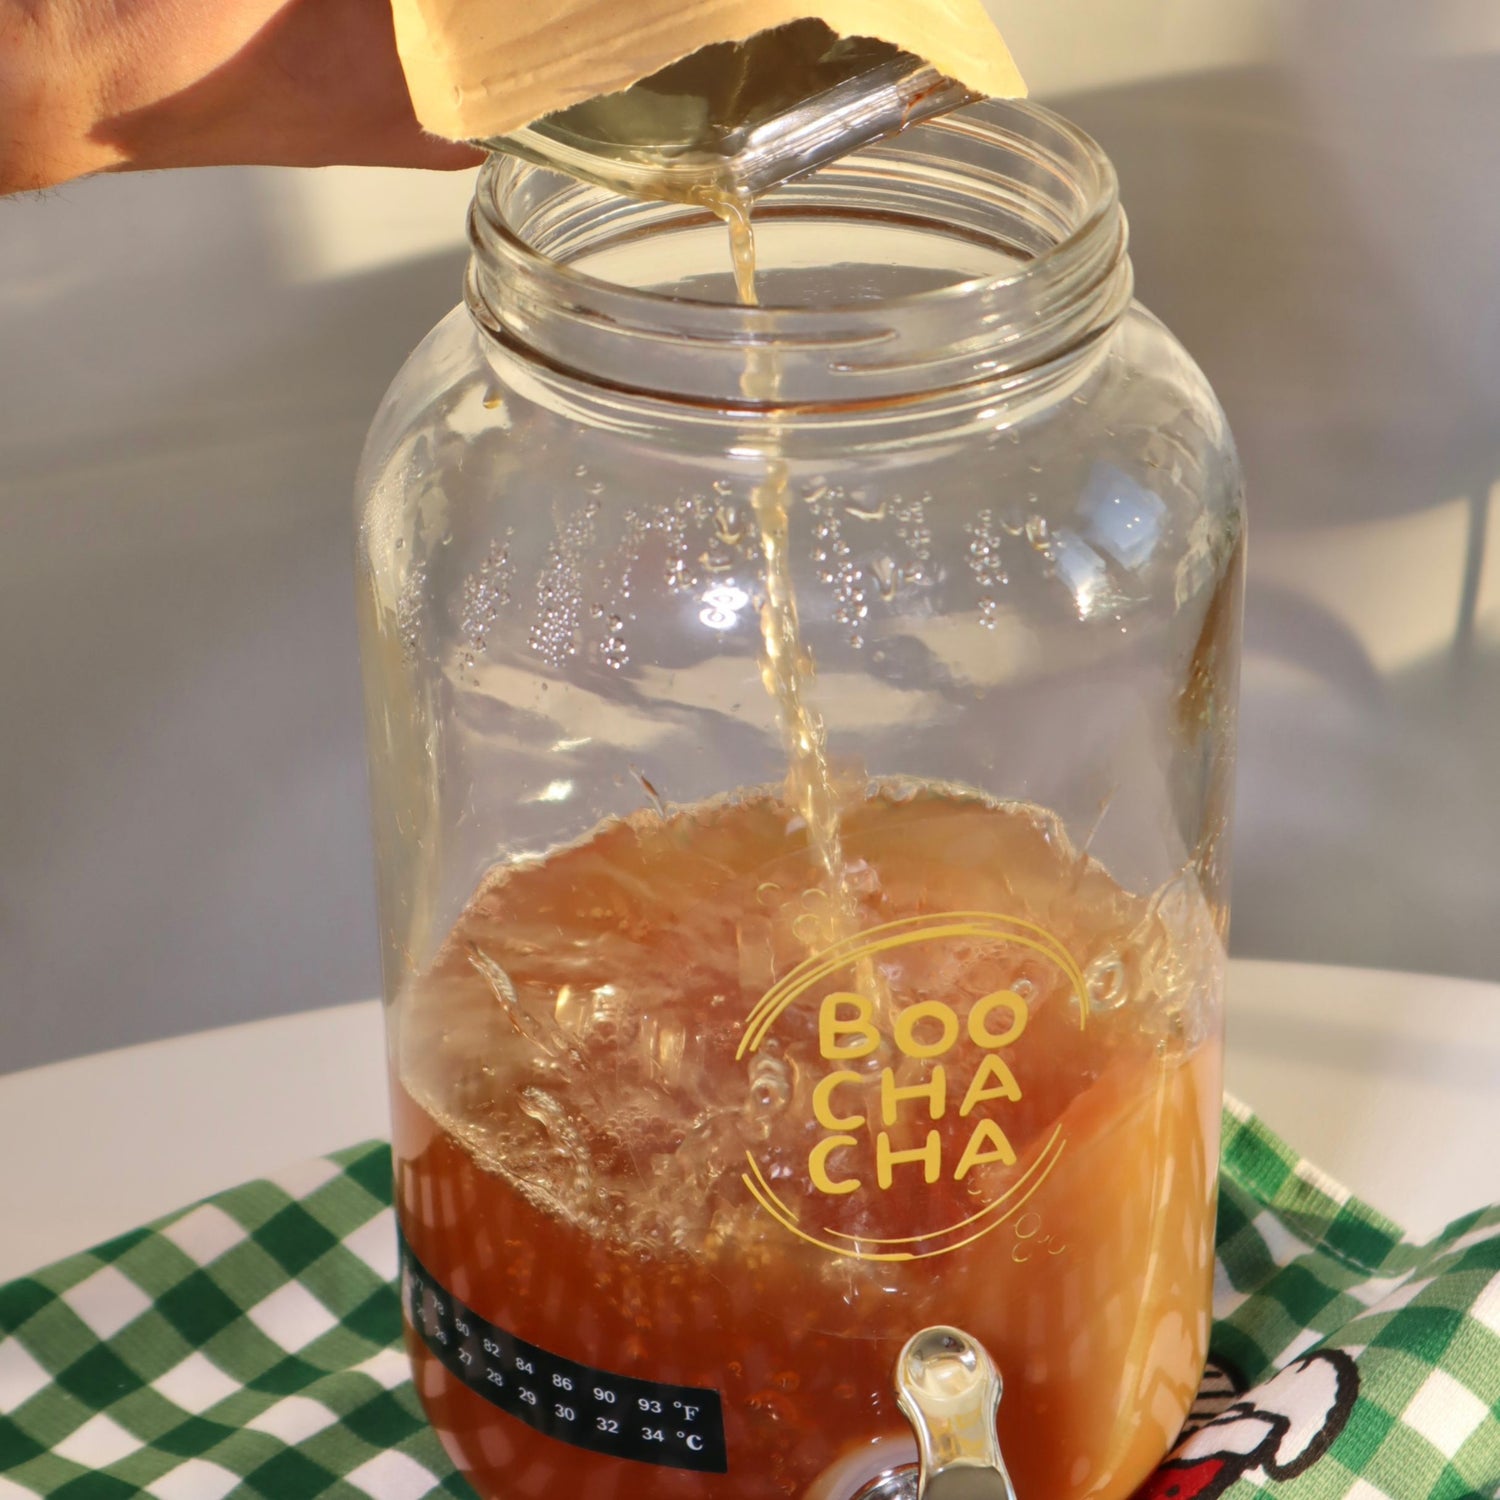 Photo of a complete kombucha starter kit from boochacha, with branding visible and bright, being set-up by a beginner, looking fun and vibrant - boochacha